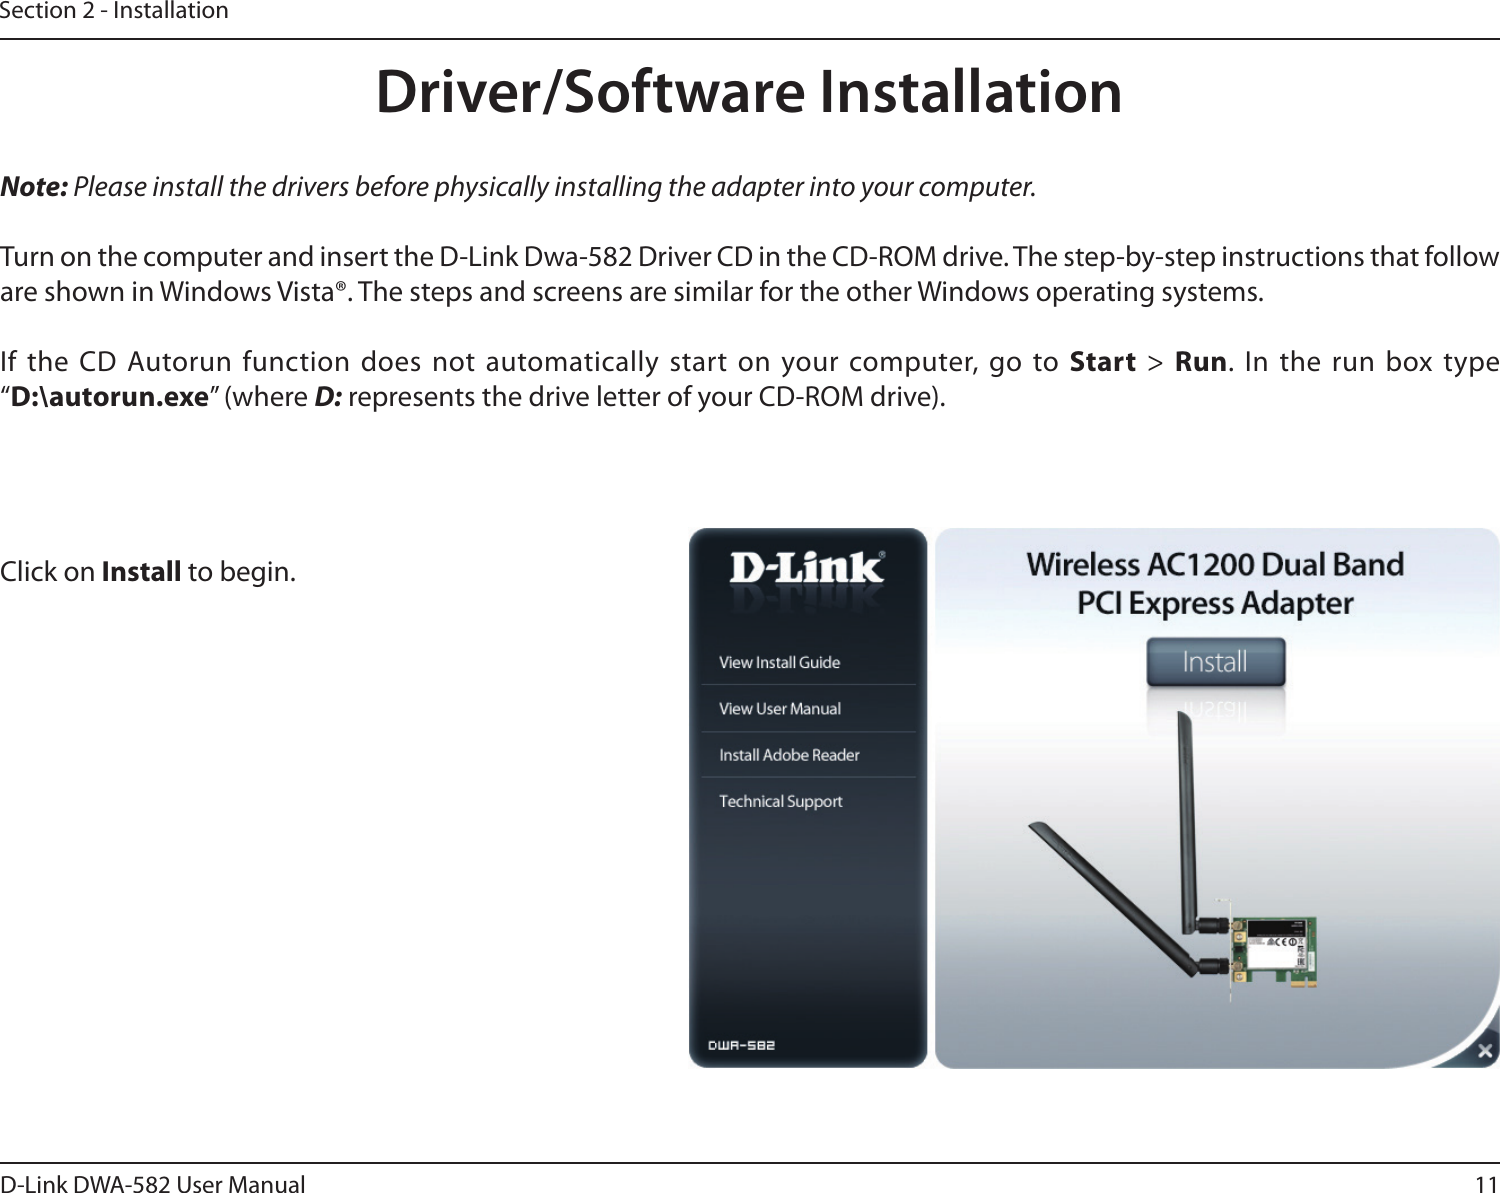 11D-Link DWA-582 User ManualSection 2 - InstallationNote: Please install the drivers before physically installing the adapter into your computer. Turn on the computer and insert the D-Link Dwa-582 Driver CD in the CD-ROM drive. The step-by-step instructions that follow are shown in Windows Vista®. The steps and screens are similar for the other Windows operating systems.If the CD Autorun function does not automatically start on your computer, go to Start &gt; Run. In the run box type “D:\autorun.exe” (where D: represents the drive letter of your CD-ROM drive).Click on Install to begin. Driver/Software Installation